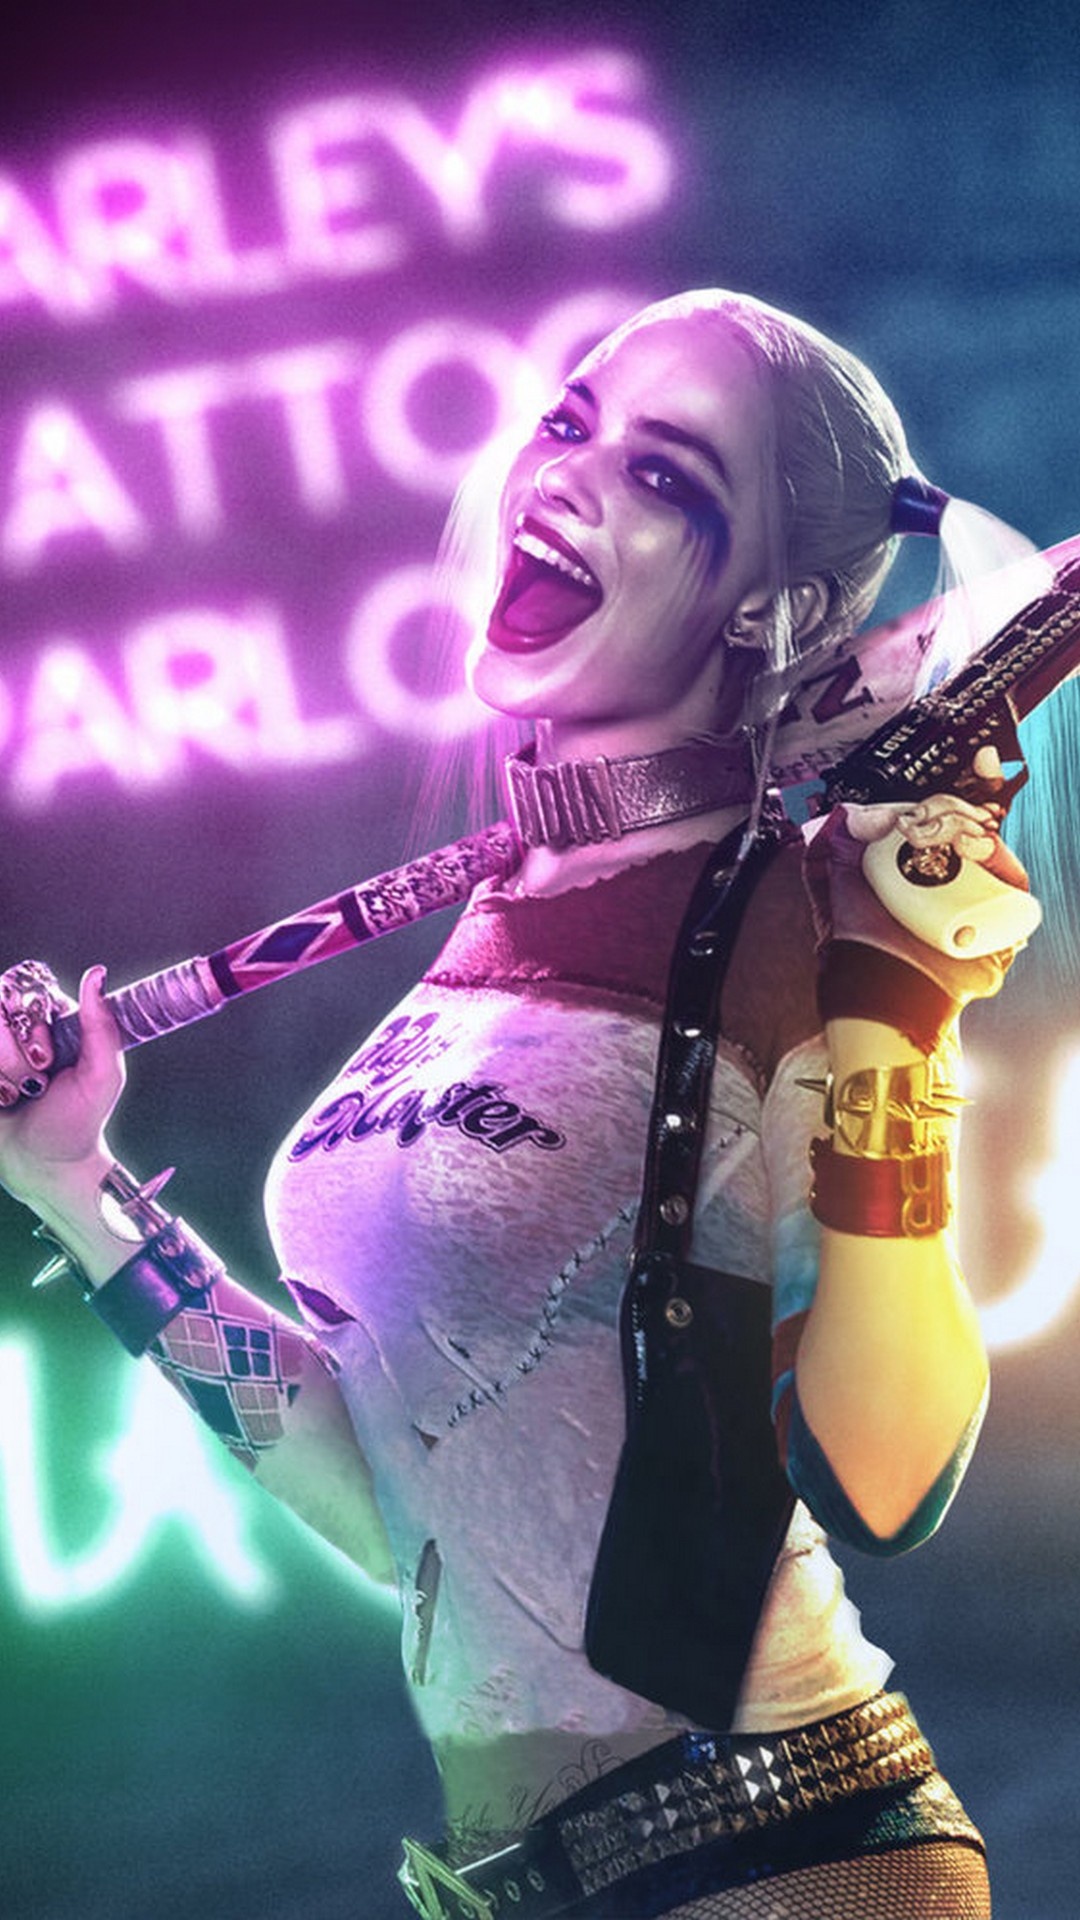 Captivating Harley Quinn, Fiery personality, Unpredictable villain, Iconic movie character, 1080x1920 Full HD Handy